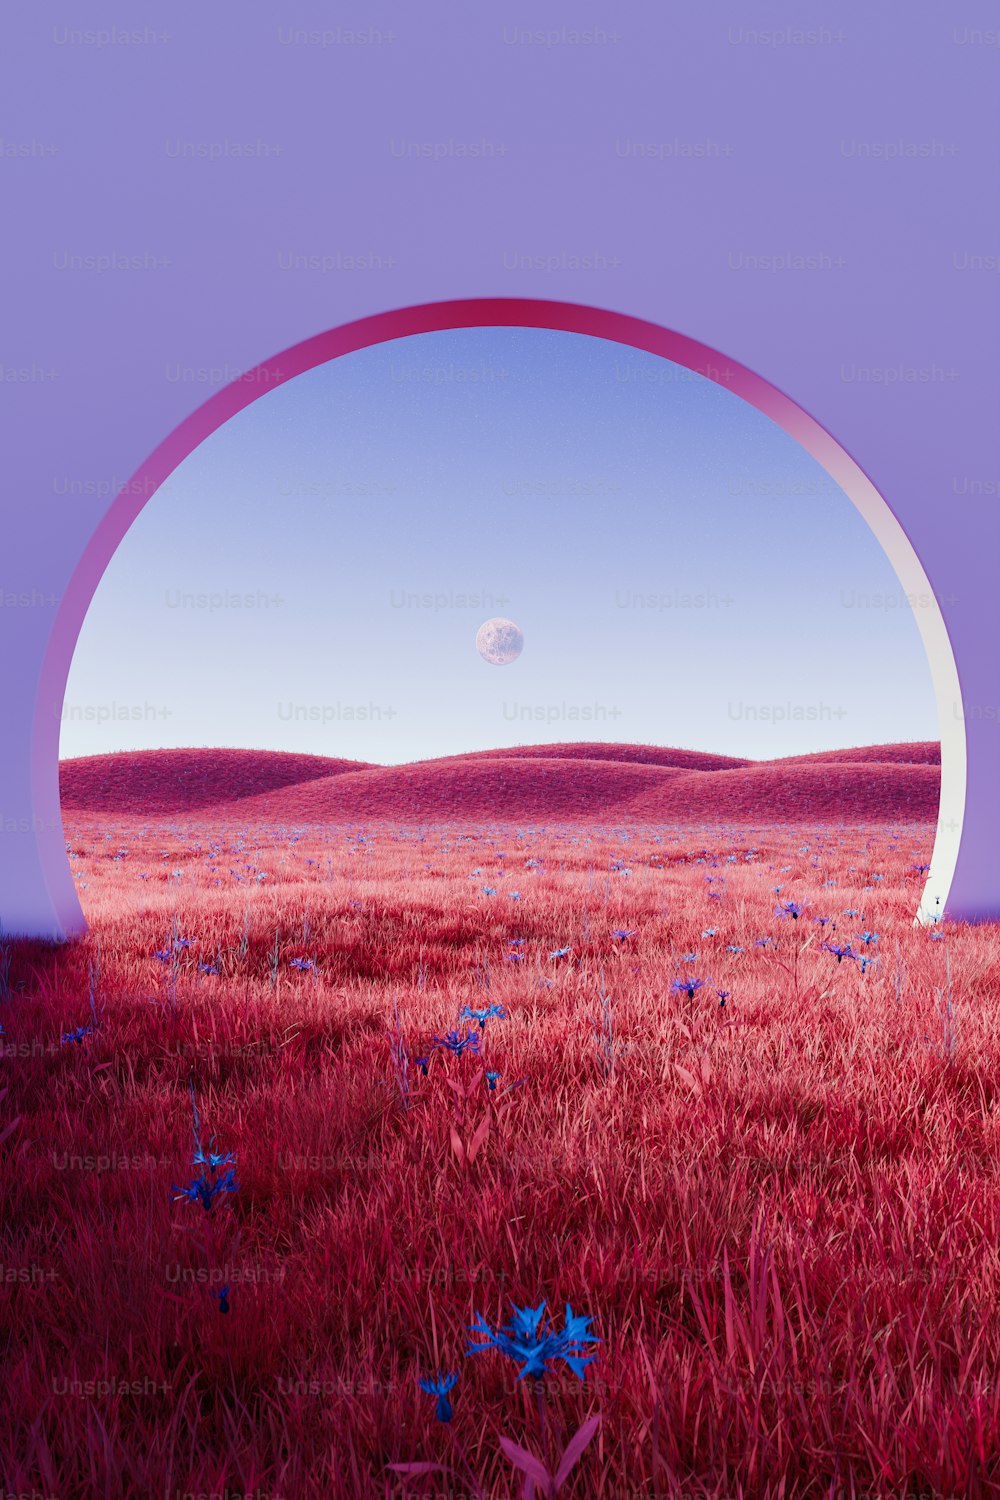 an arch in the middle of a field with blue flowers